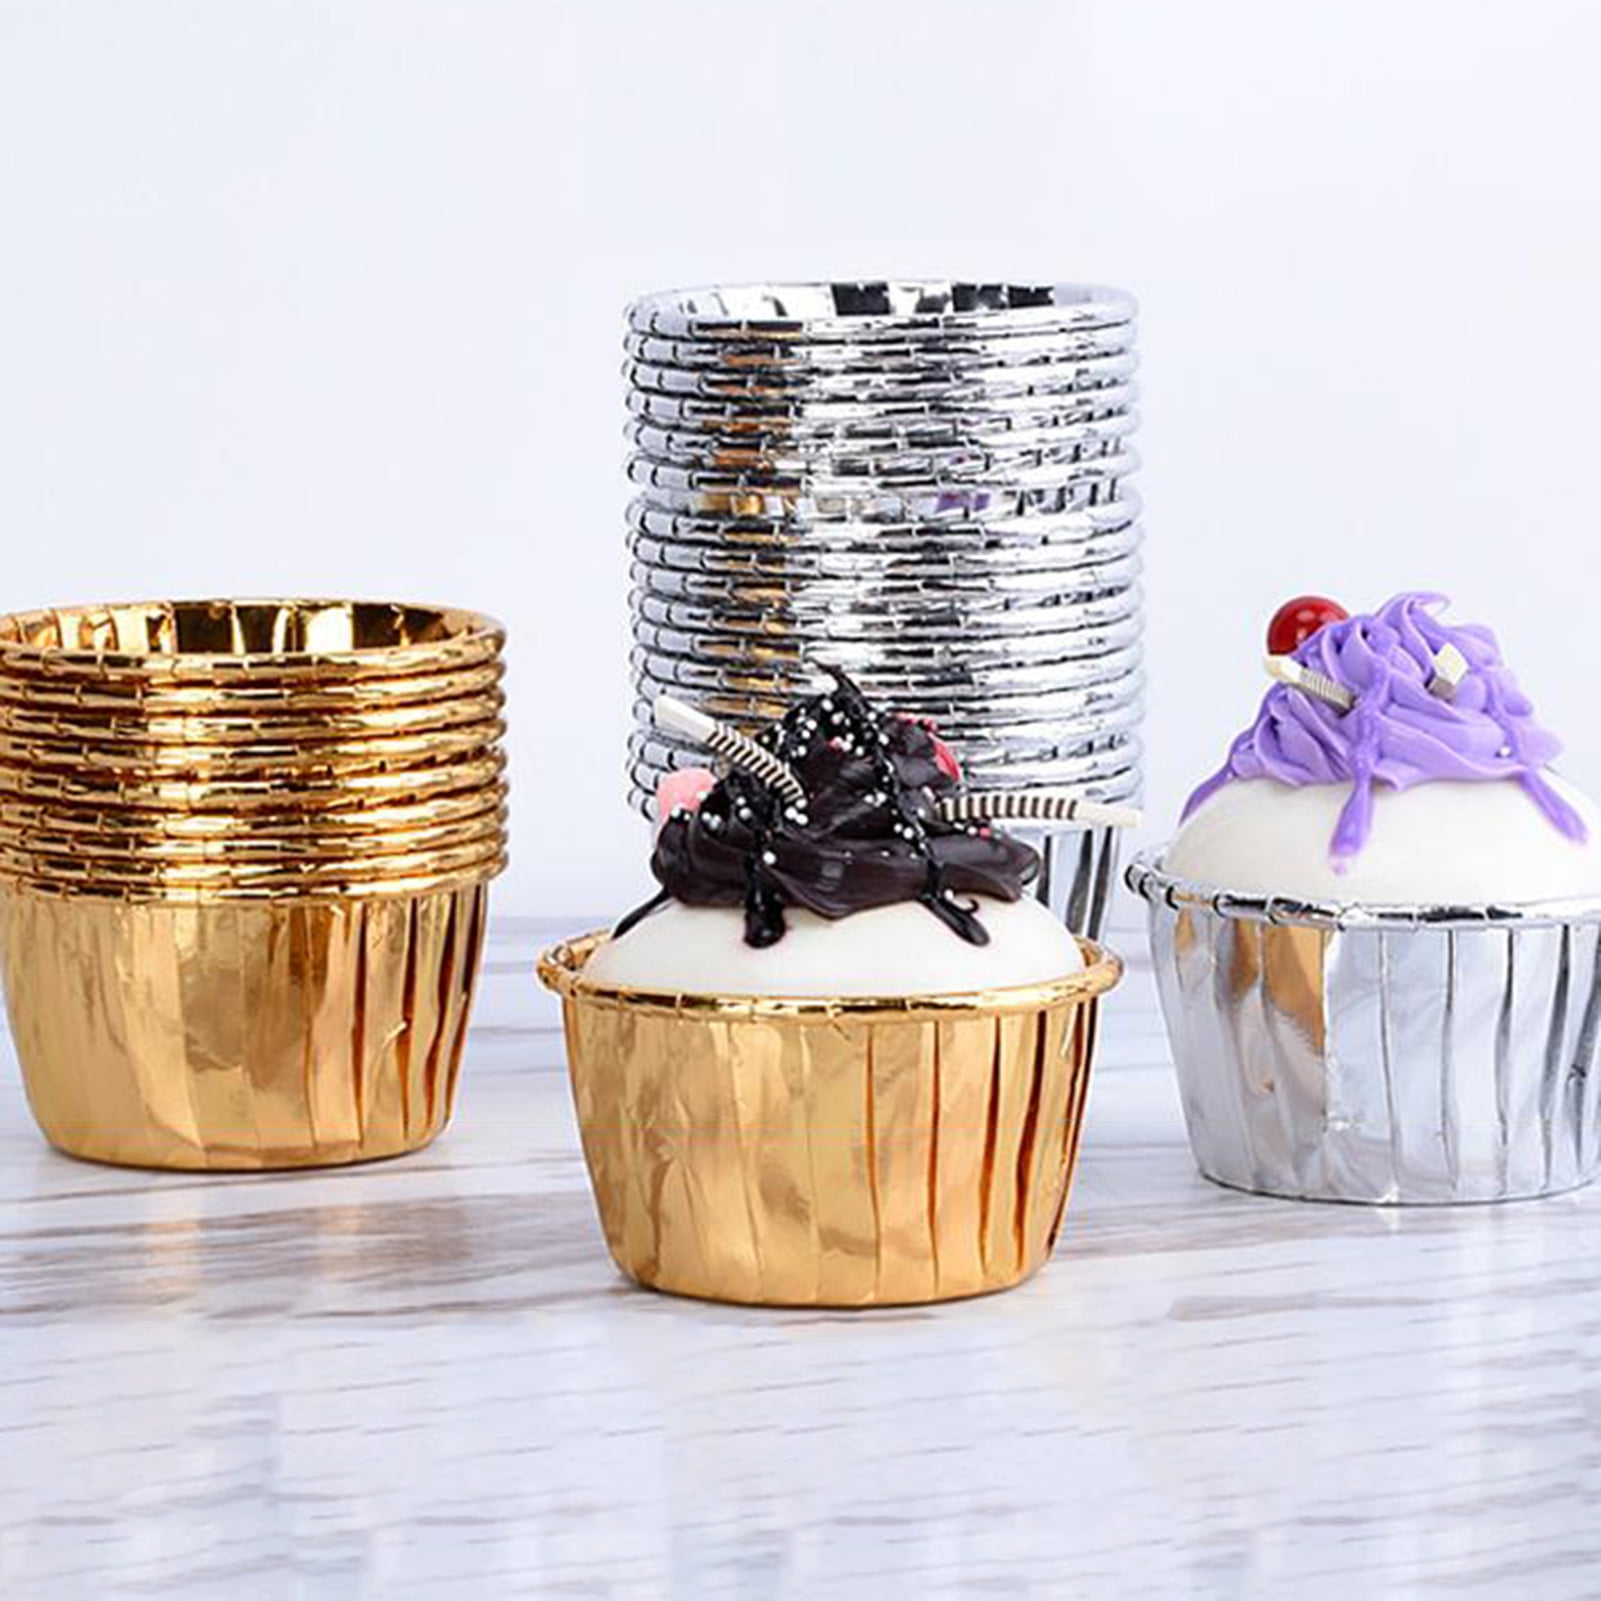 Golden BESTONZON 50Pcs Cupcake Wrappers Baking Cups Tulip Shape Liners Muffin Cake Cup Party Favors